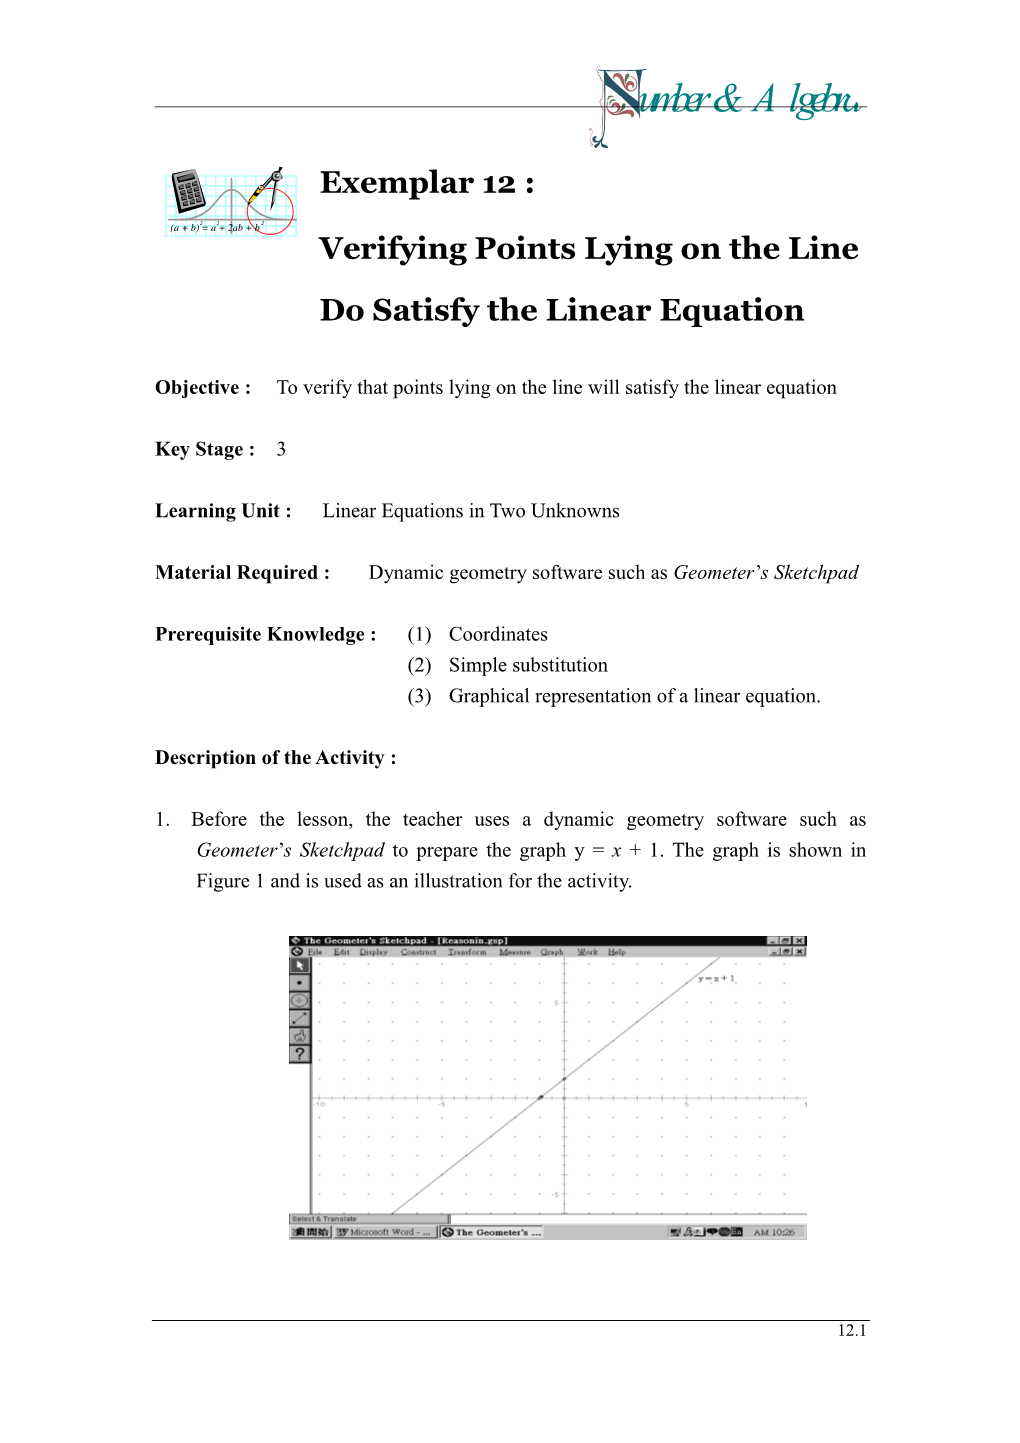 Verifying Points Lying on the Line Do Satisfy the Linear Equation